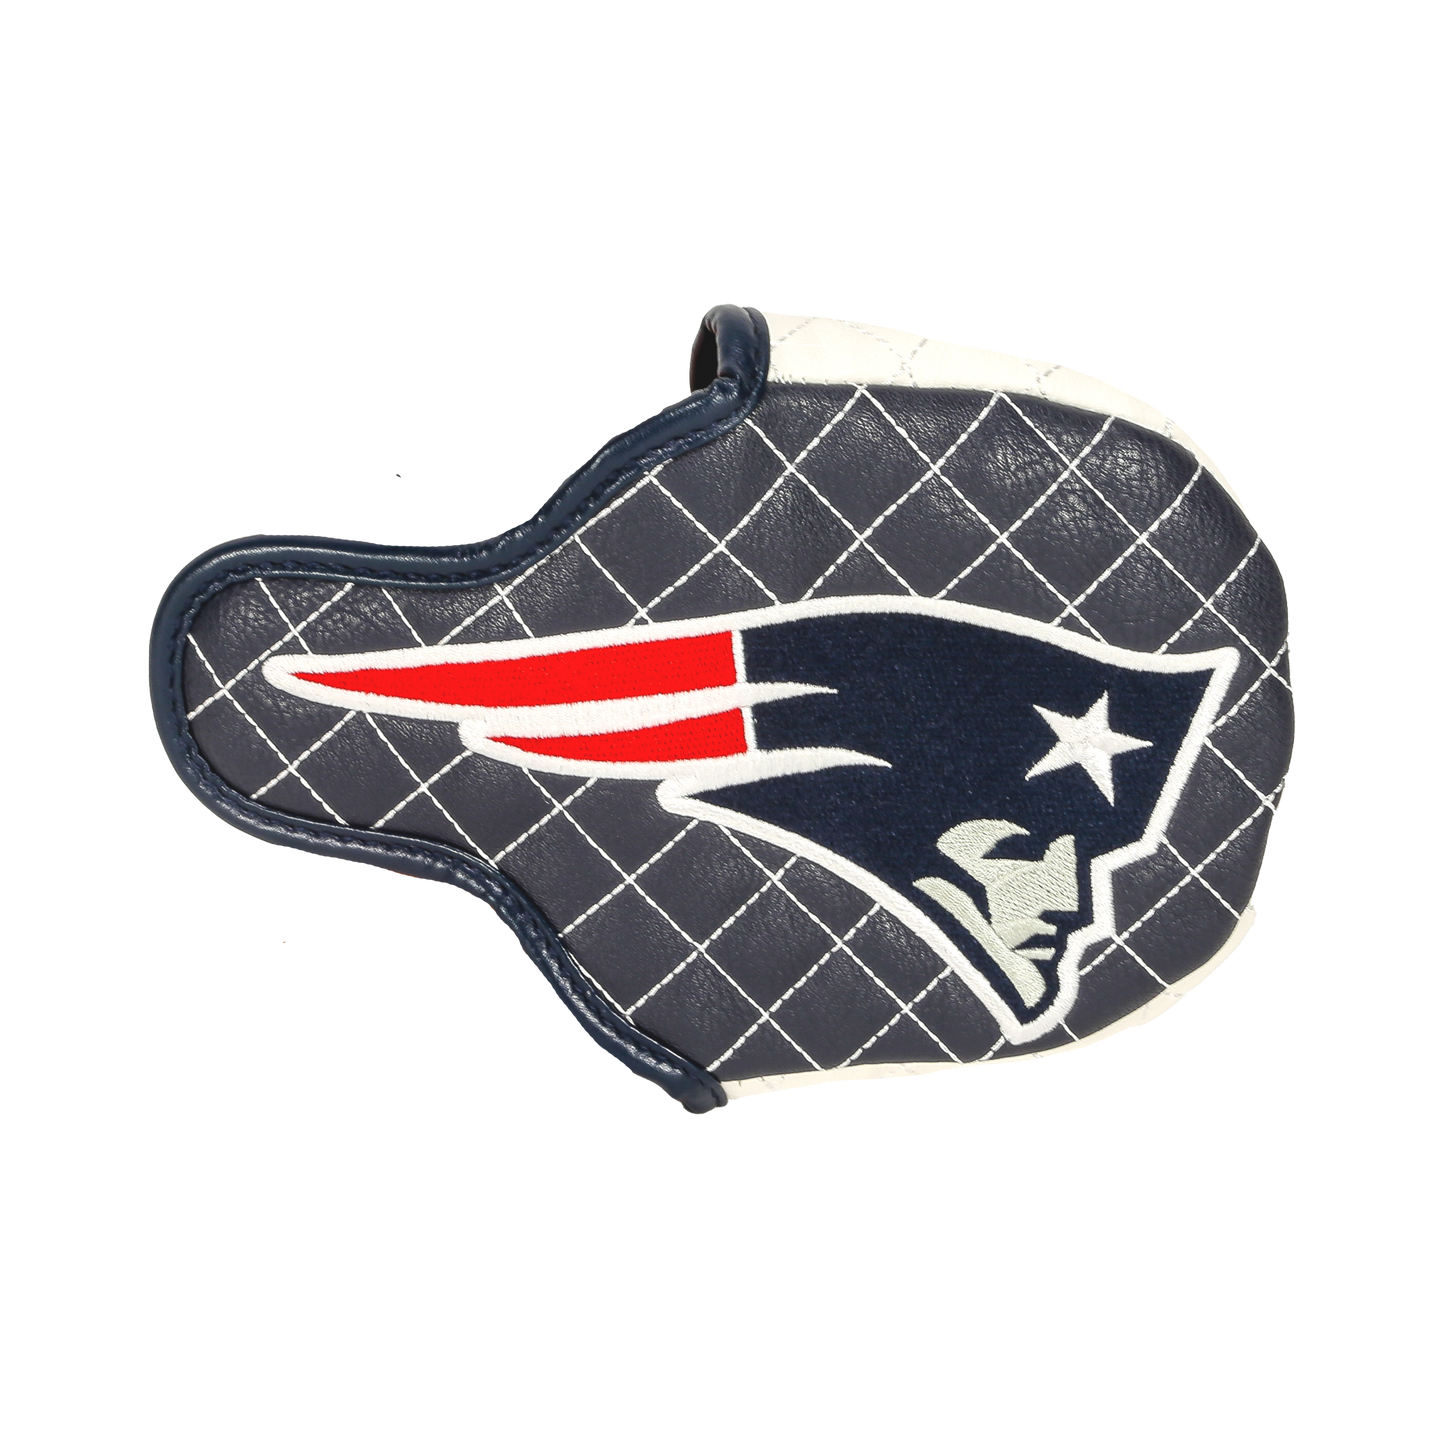 New England "Patriots" Mallet Putter Cover